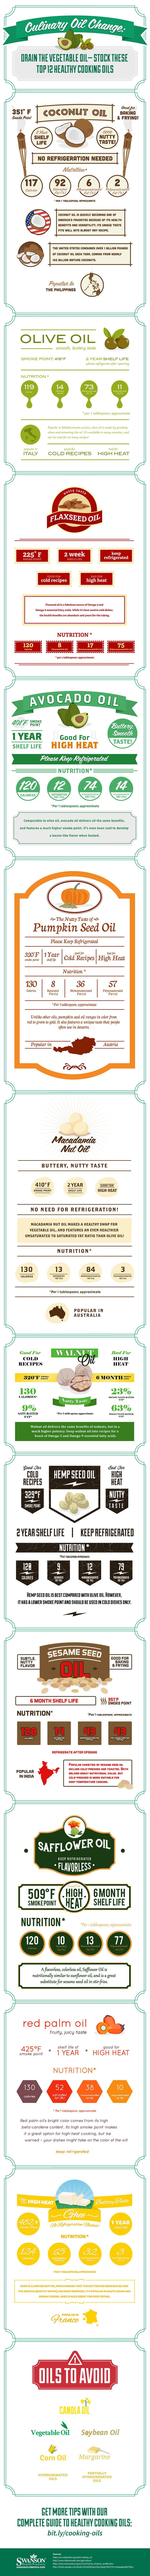 Top 12 Healthy Cooking Oils Infographic